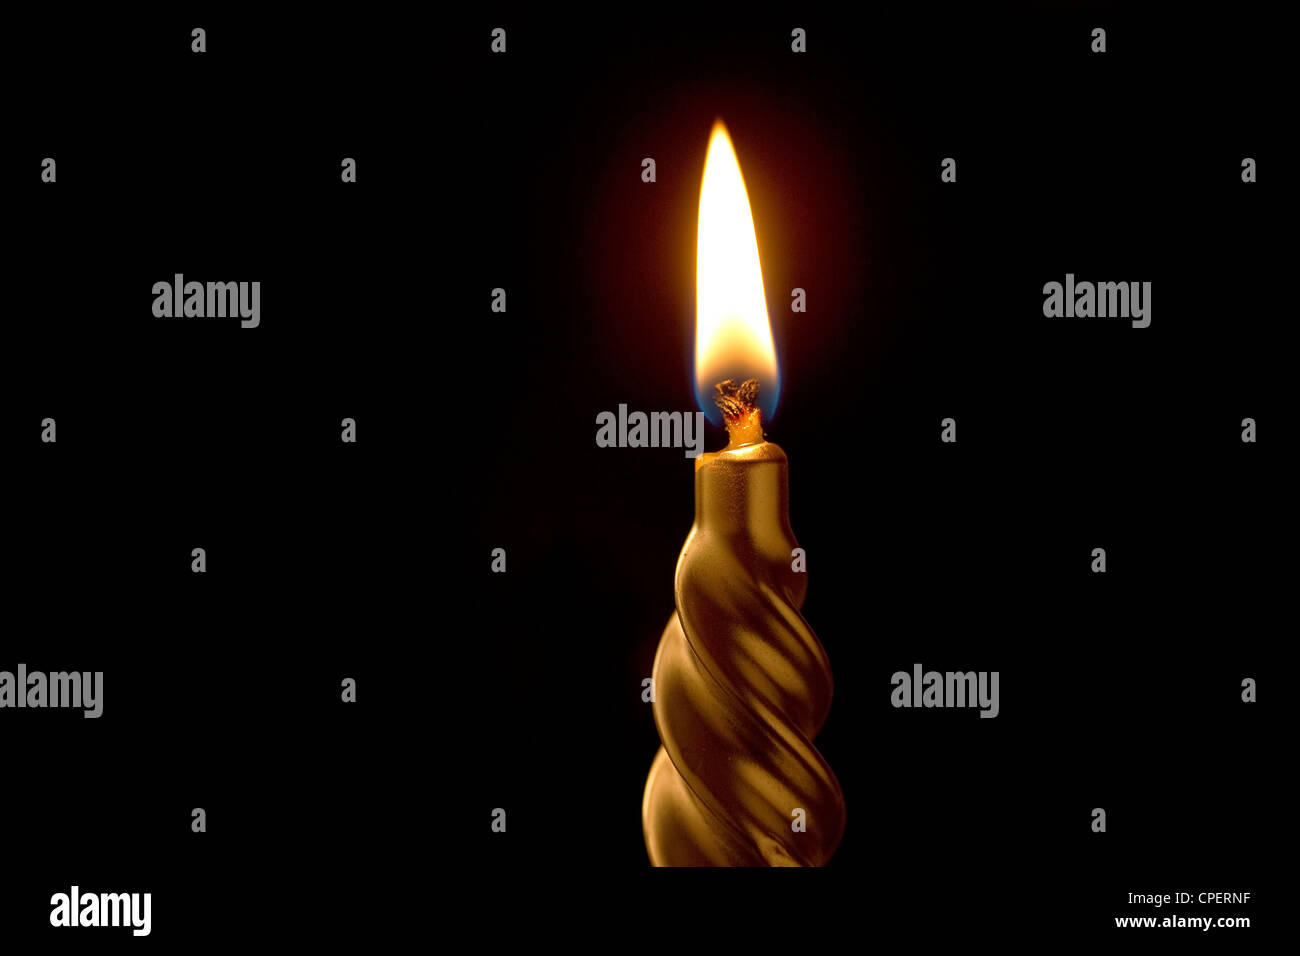 Candlelight With Black Background Stock Photo